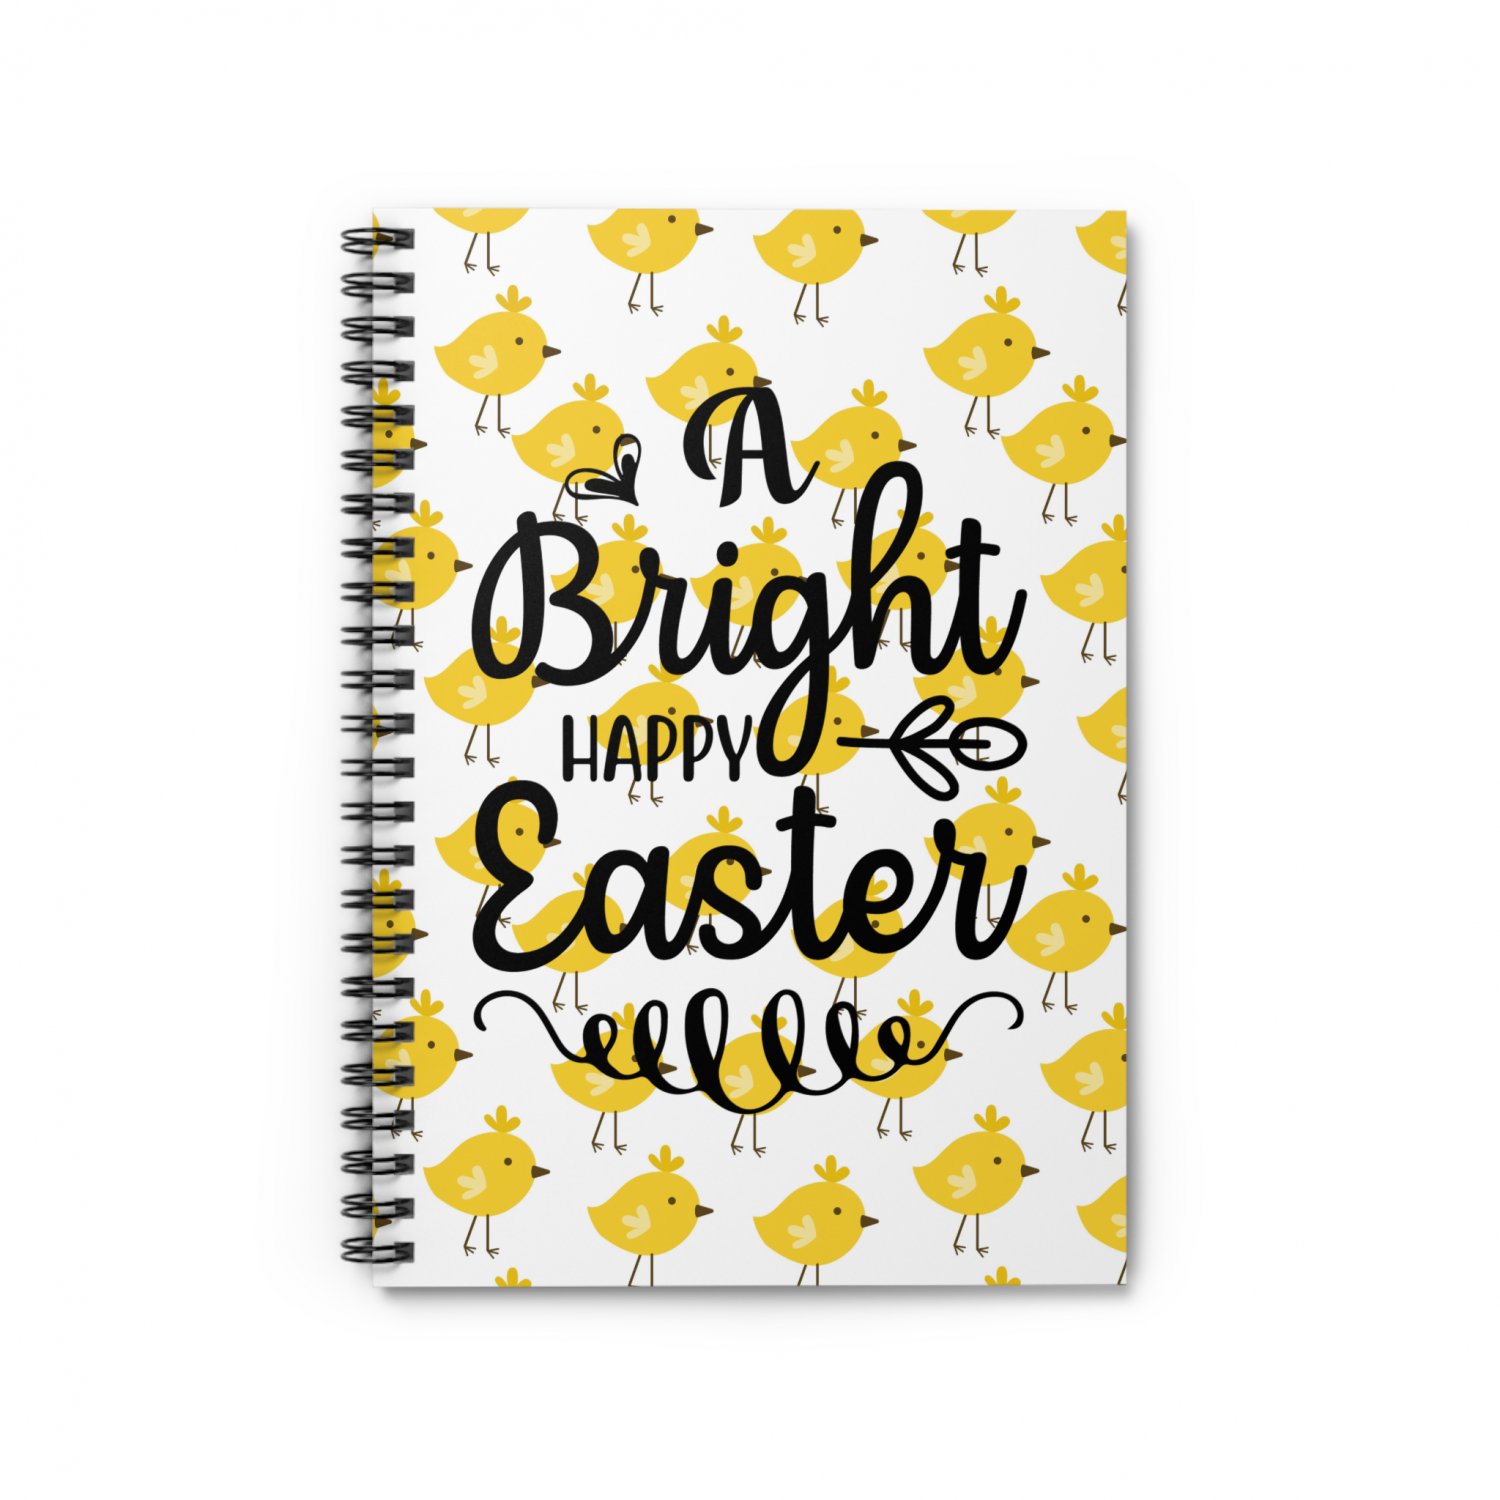 A Bright Happy Easter, Spiral Notebook - Ruled Line